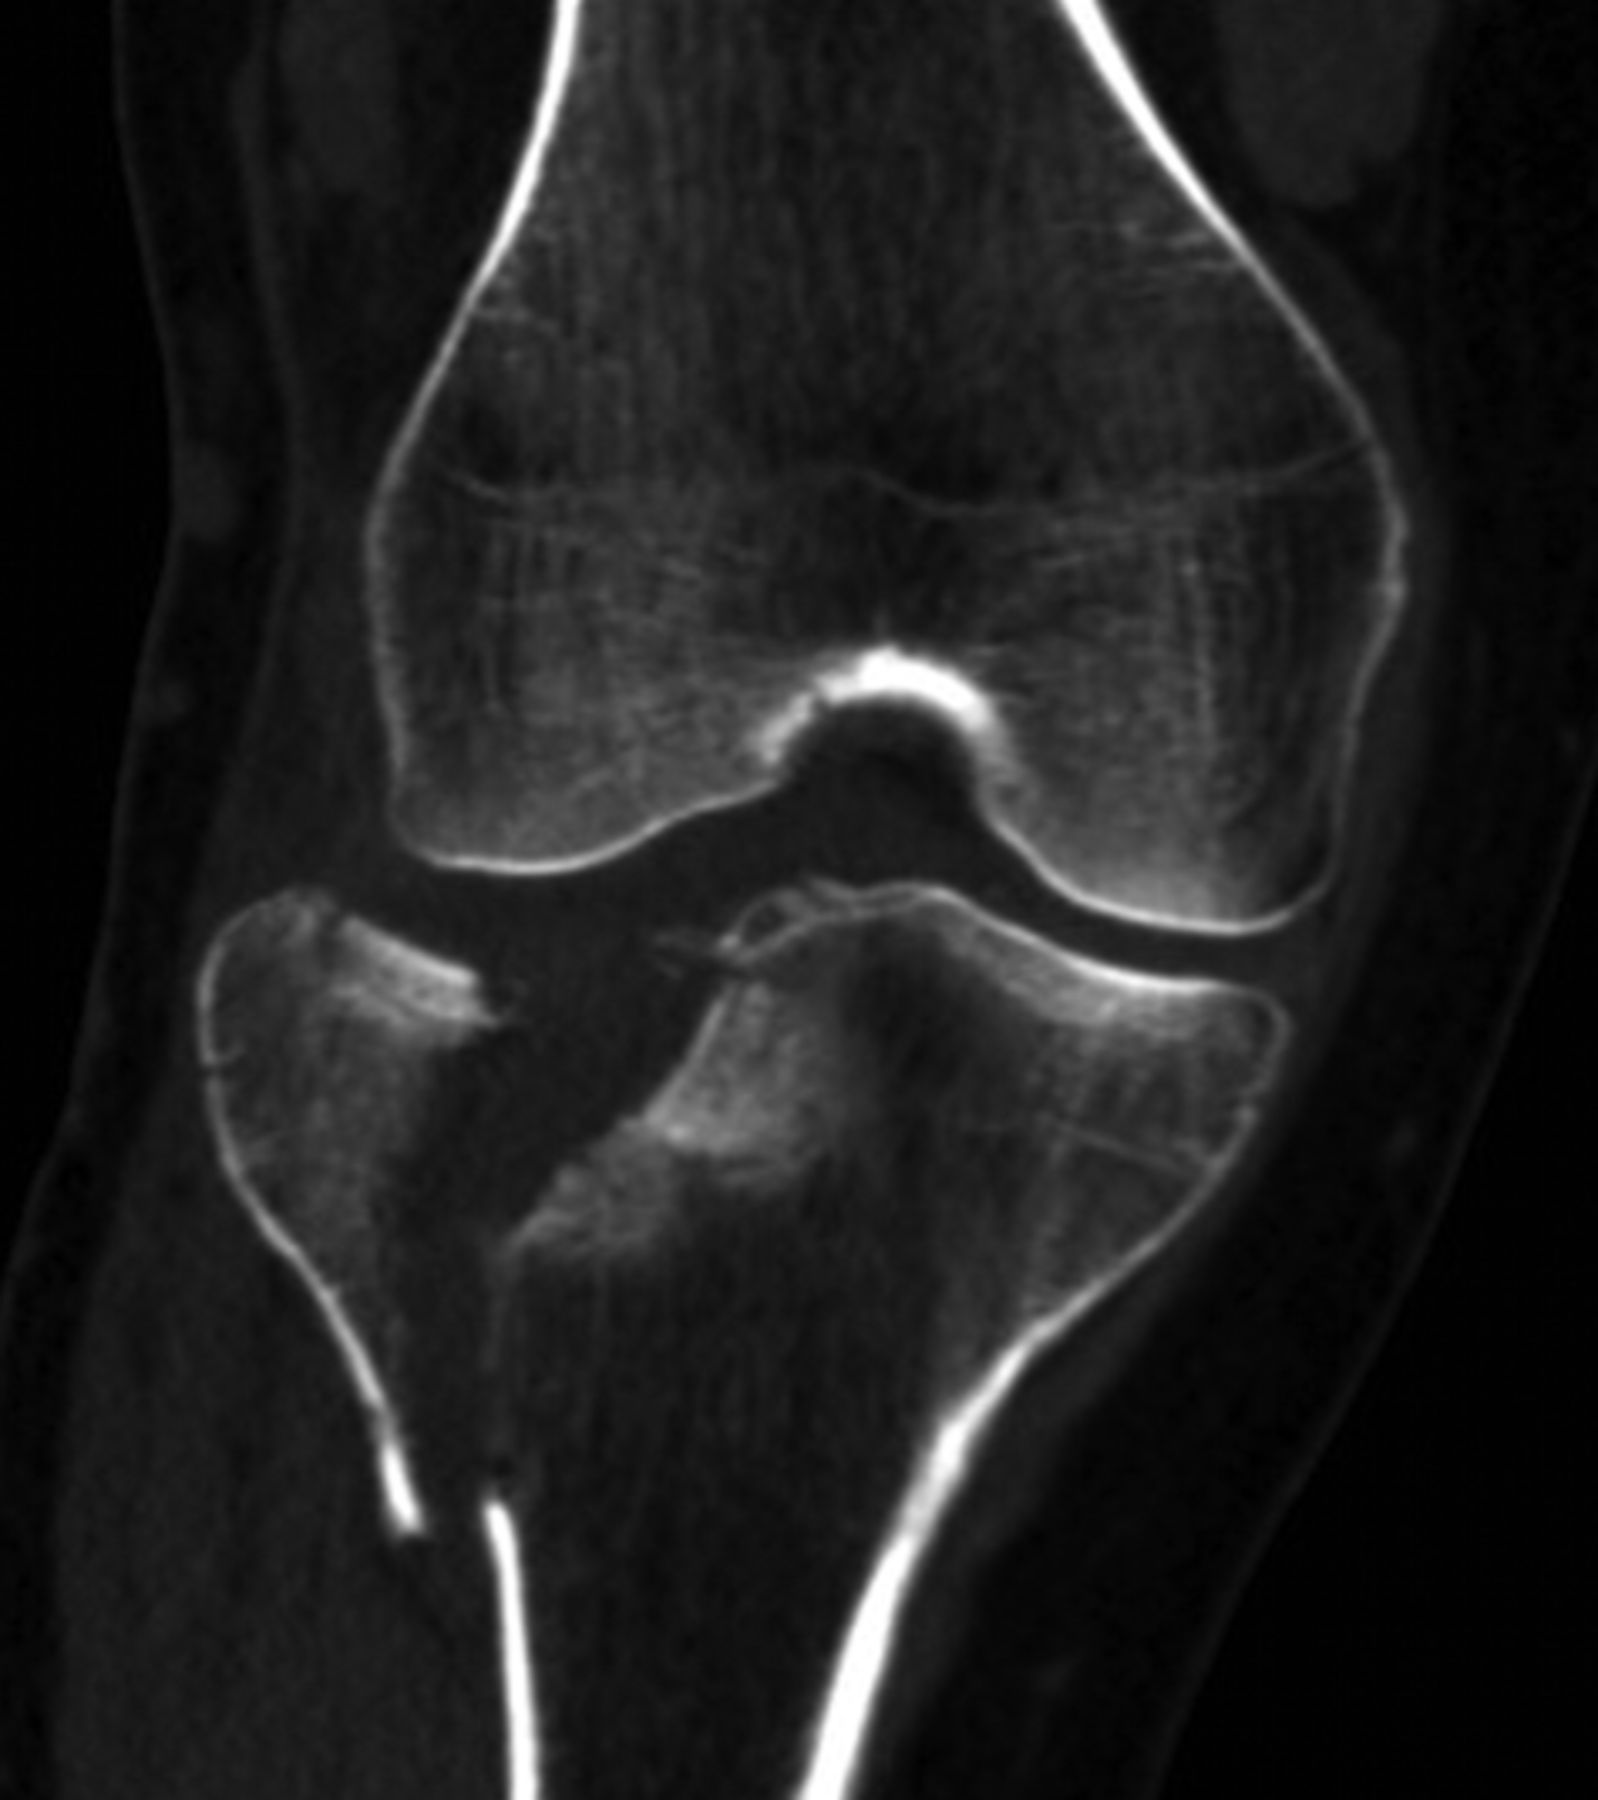 The Usefulness Of Mri And Arthroscopy In The Diagnosis And Treatment Of Soft Tissue Injuries 1050